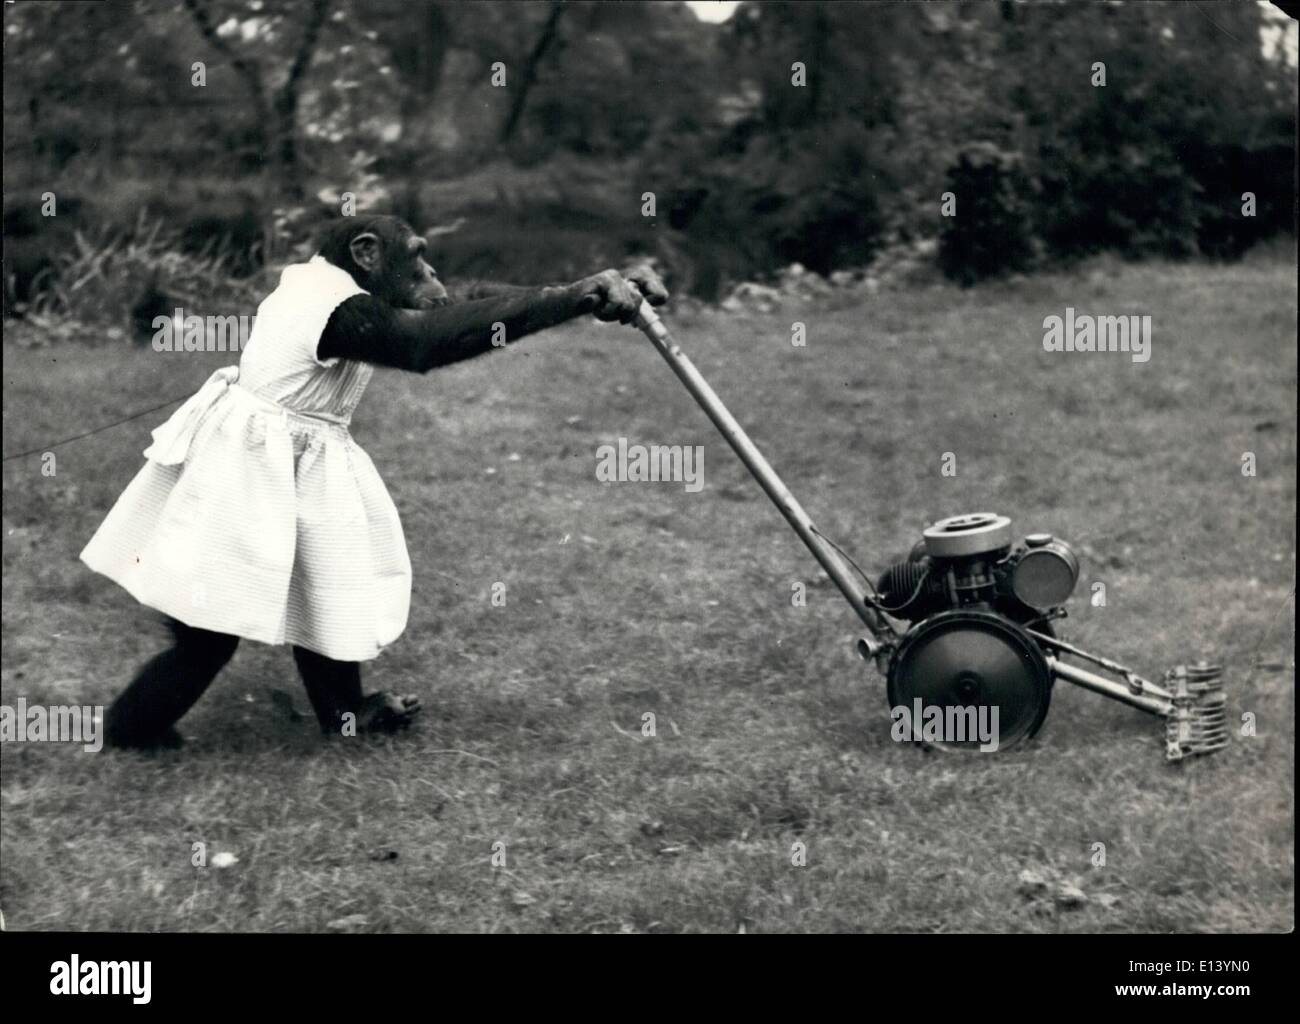 Mar. 27, 2012 - Michelle finds pushing the motor mower rather hare work - no wonder the engine isn't working. Stock Photo